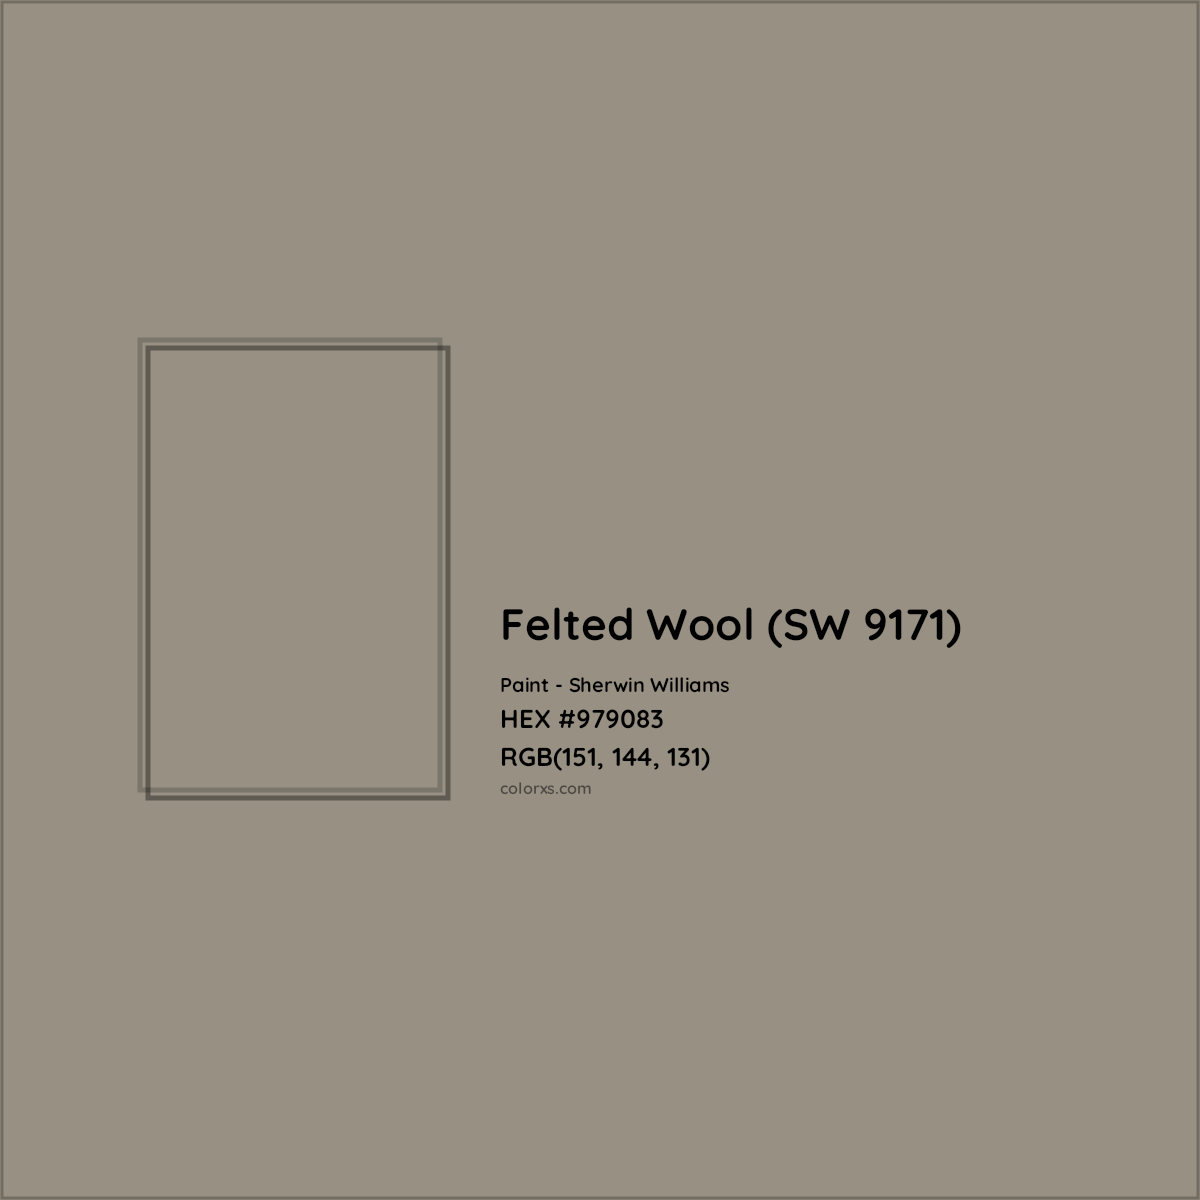 HEX #979083 Felted Wool (SW 9171) Paint Sherwin Williams - Color Code